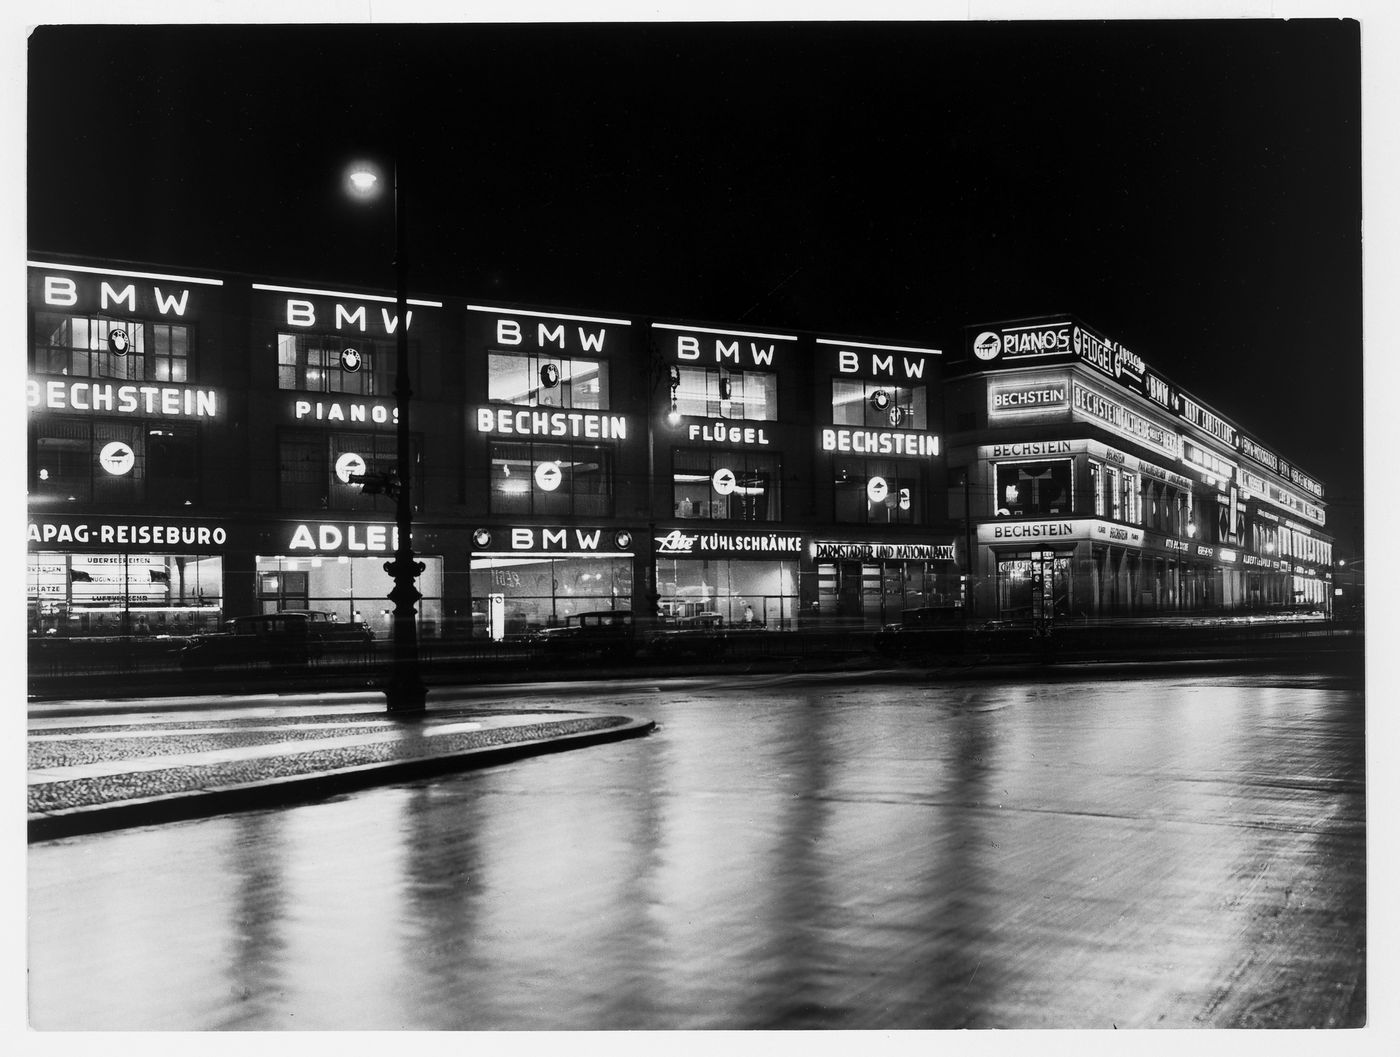 Night view of illuminated signs in long building (BMW, Bechstein, and others) seen from across street, Germany